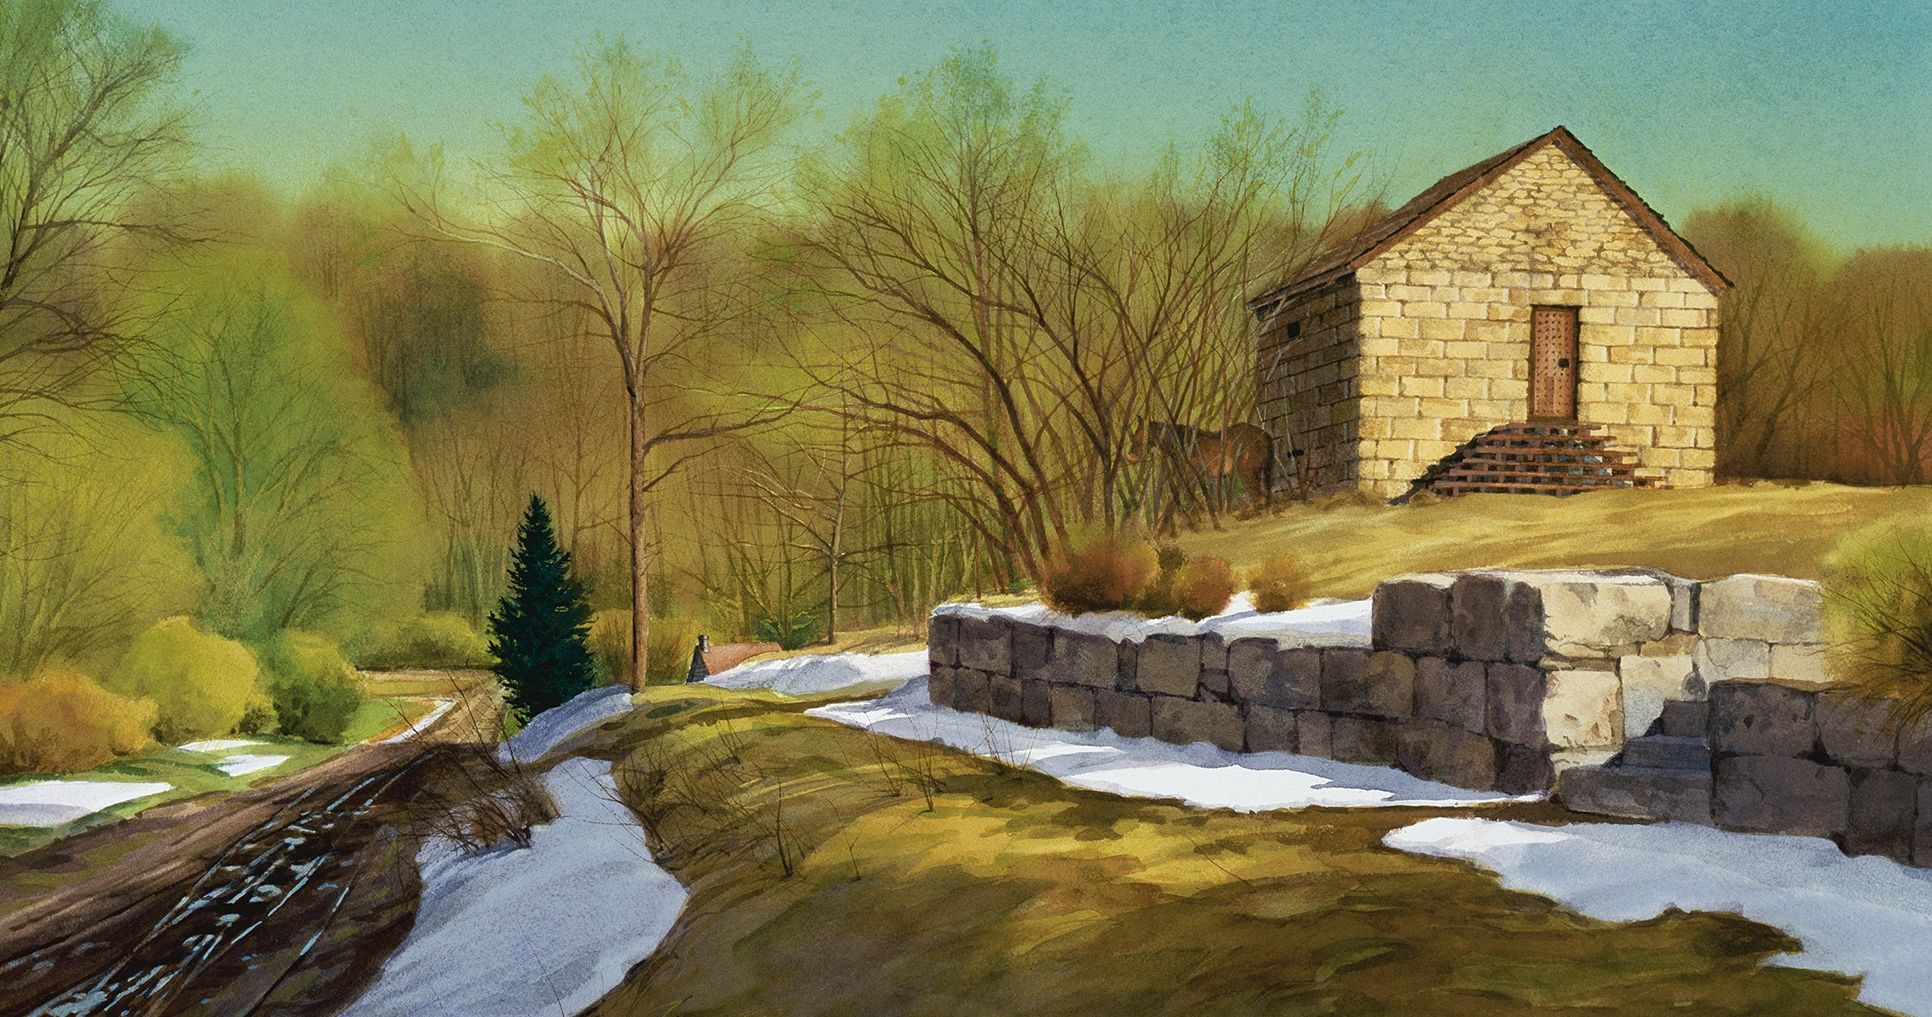 Liberty Jail Spring, by Al Rounds. Image by Church of Jesus Christ.